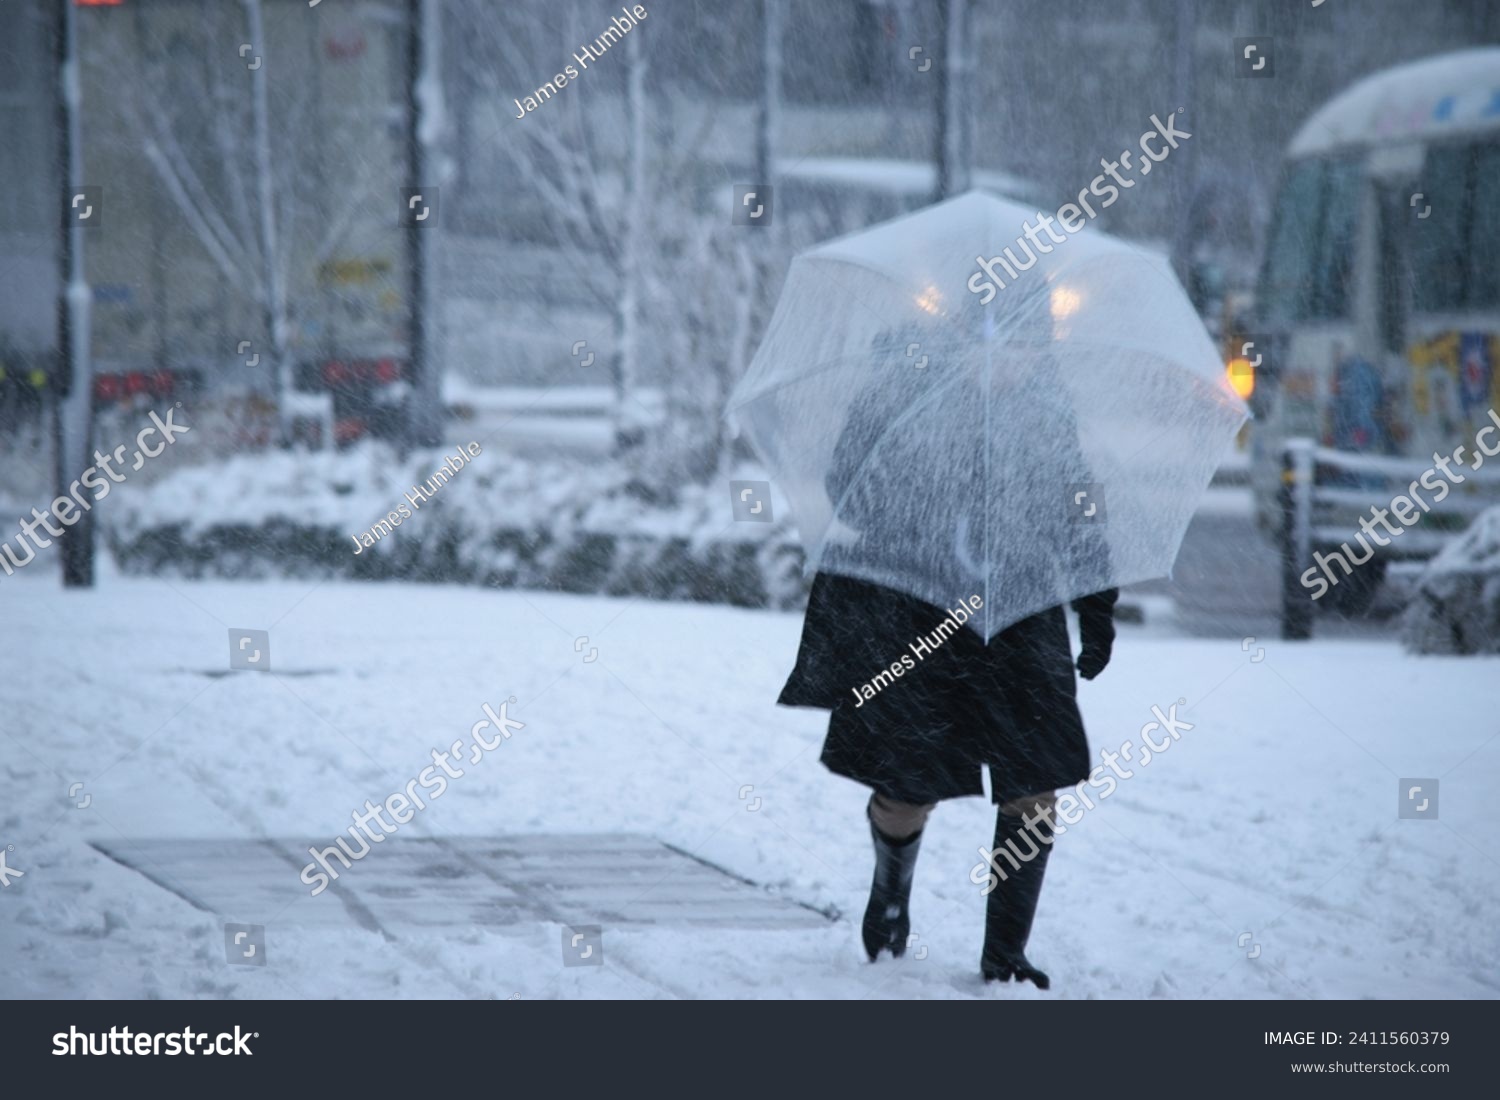 Person walking with a transparent umbrella on a snowy day. #2411560379